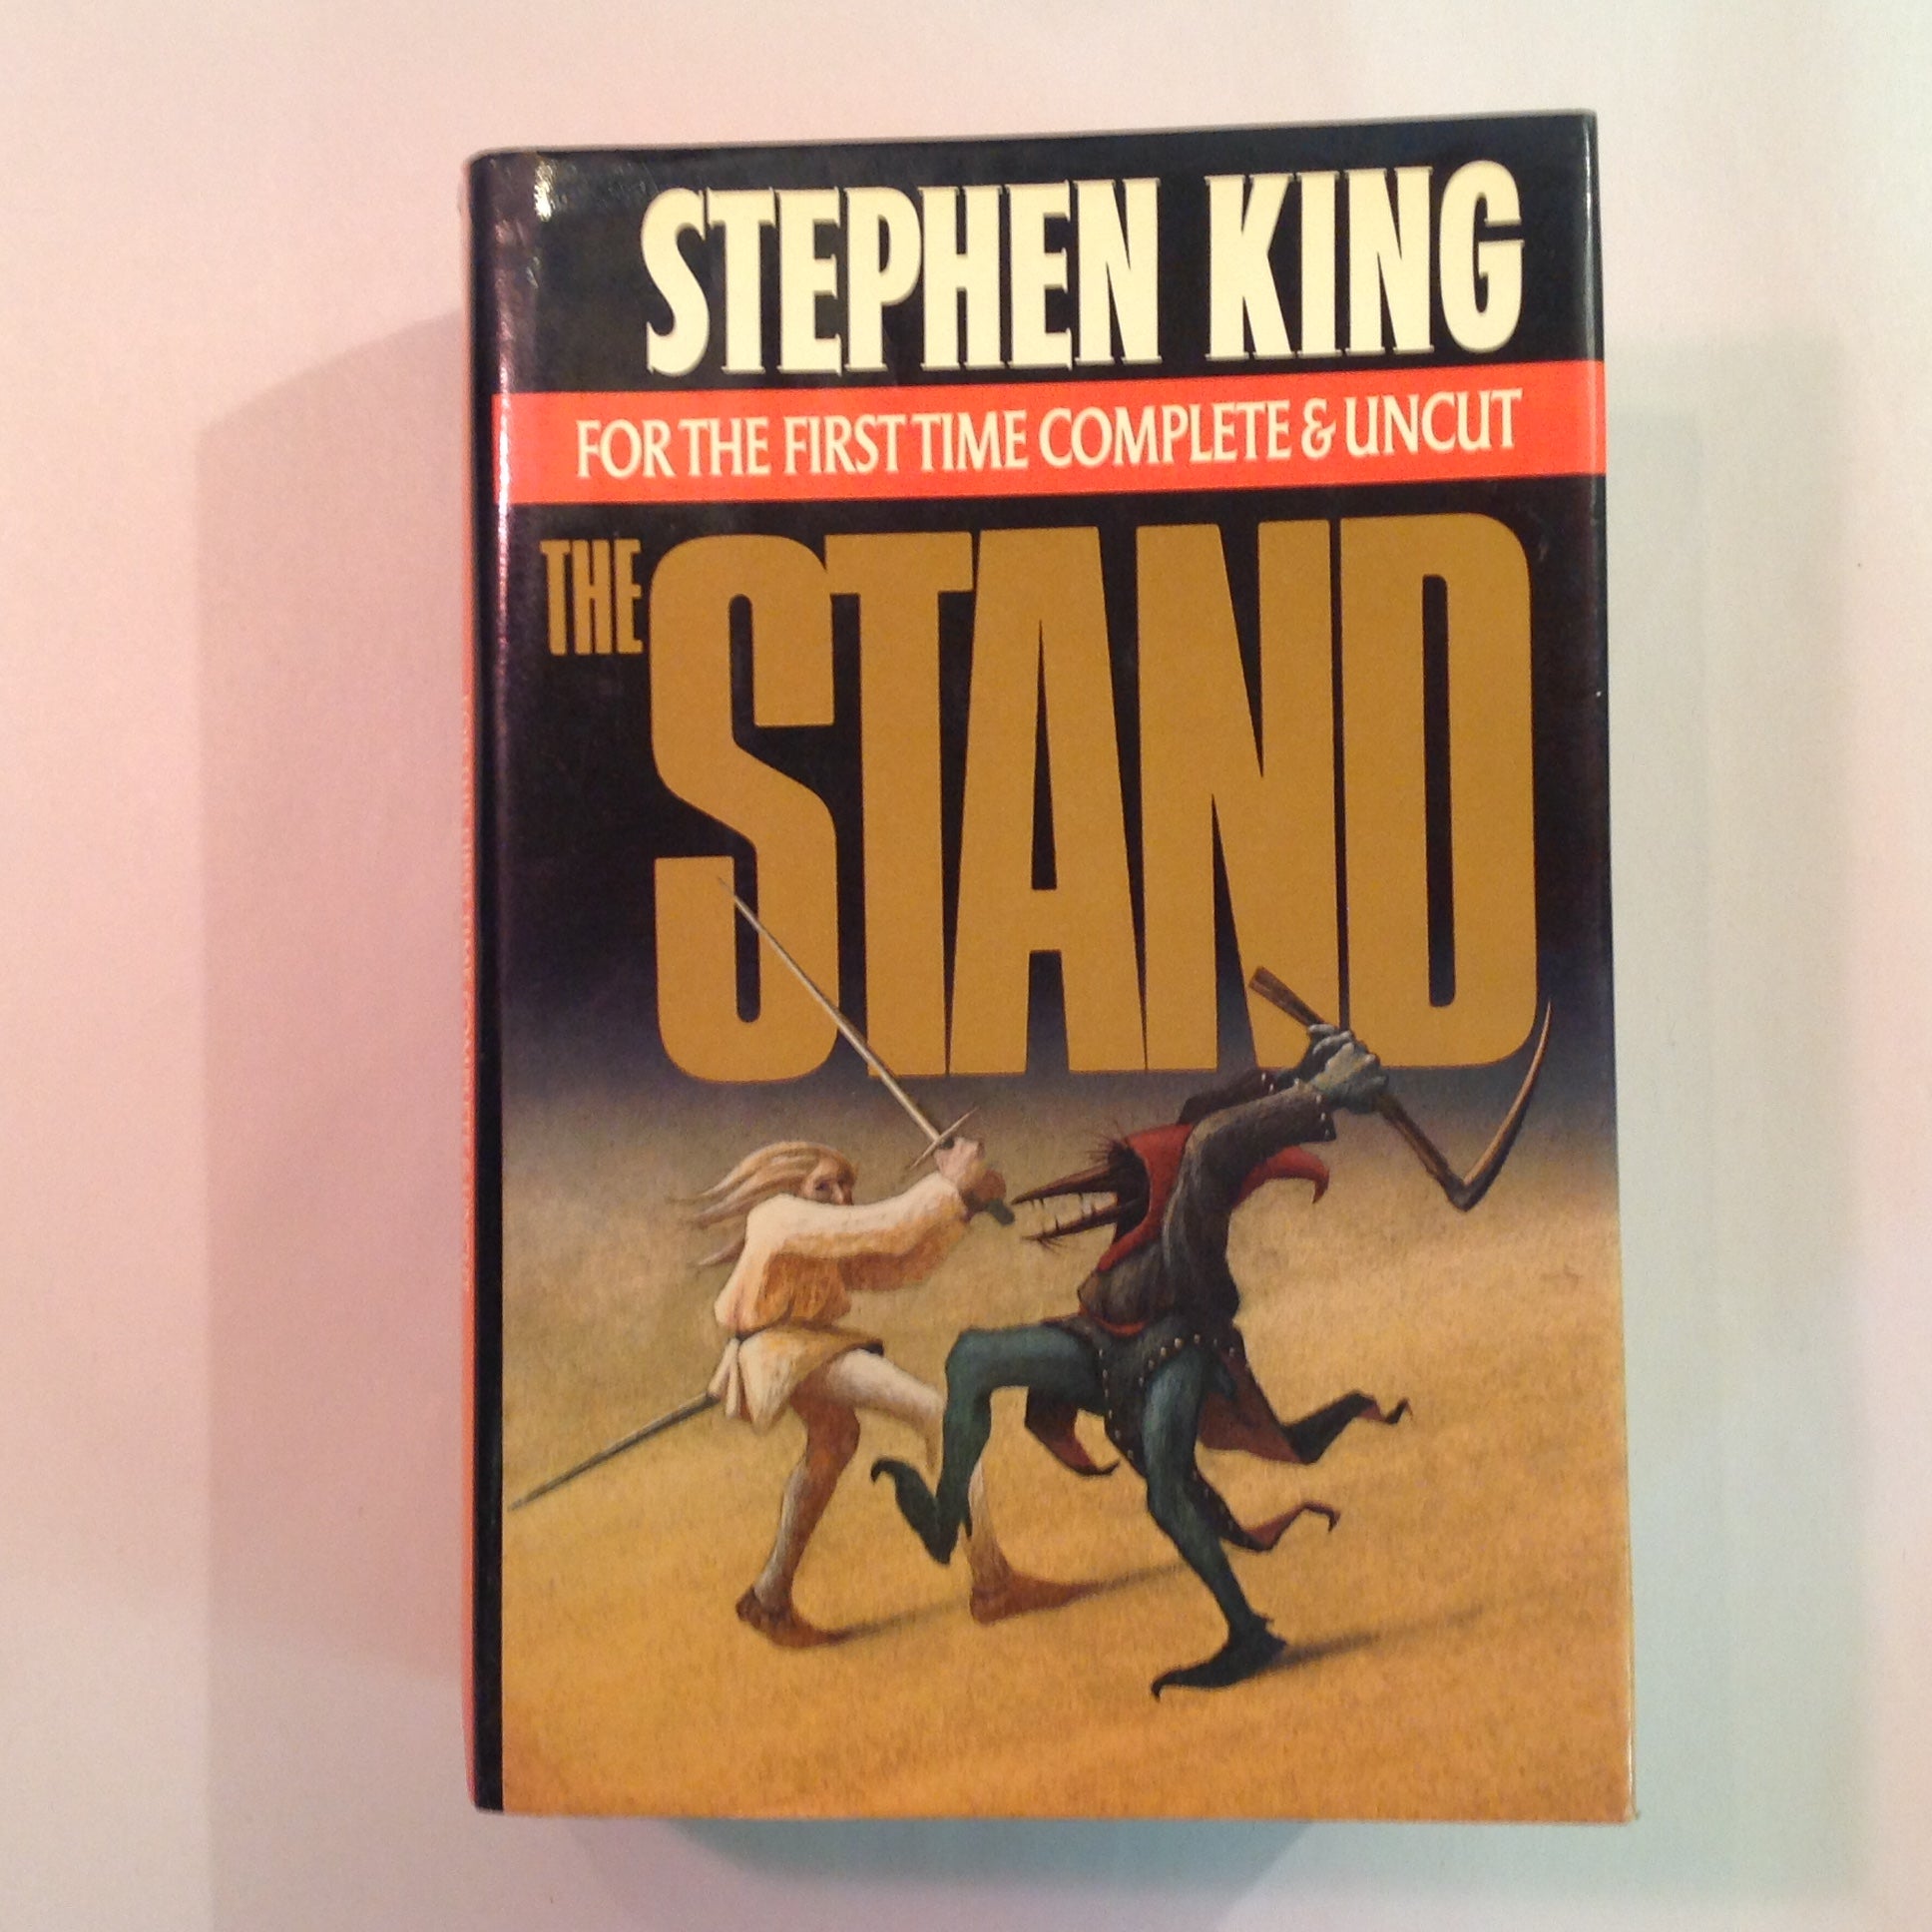 Vintage 1990 Hardcover with Dust Jacket The Stand: Complete & Uncut Stephen King